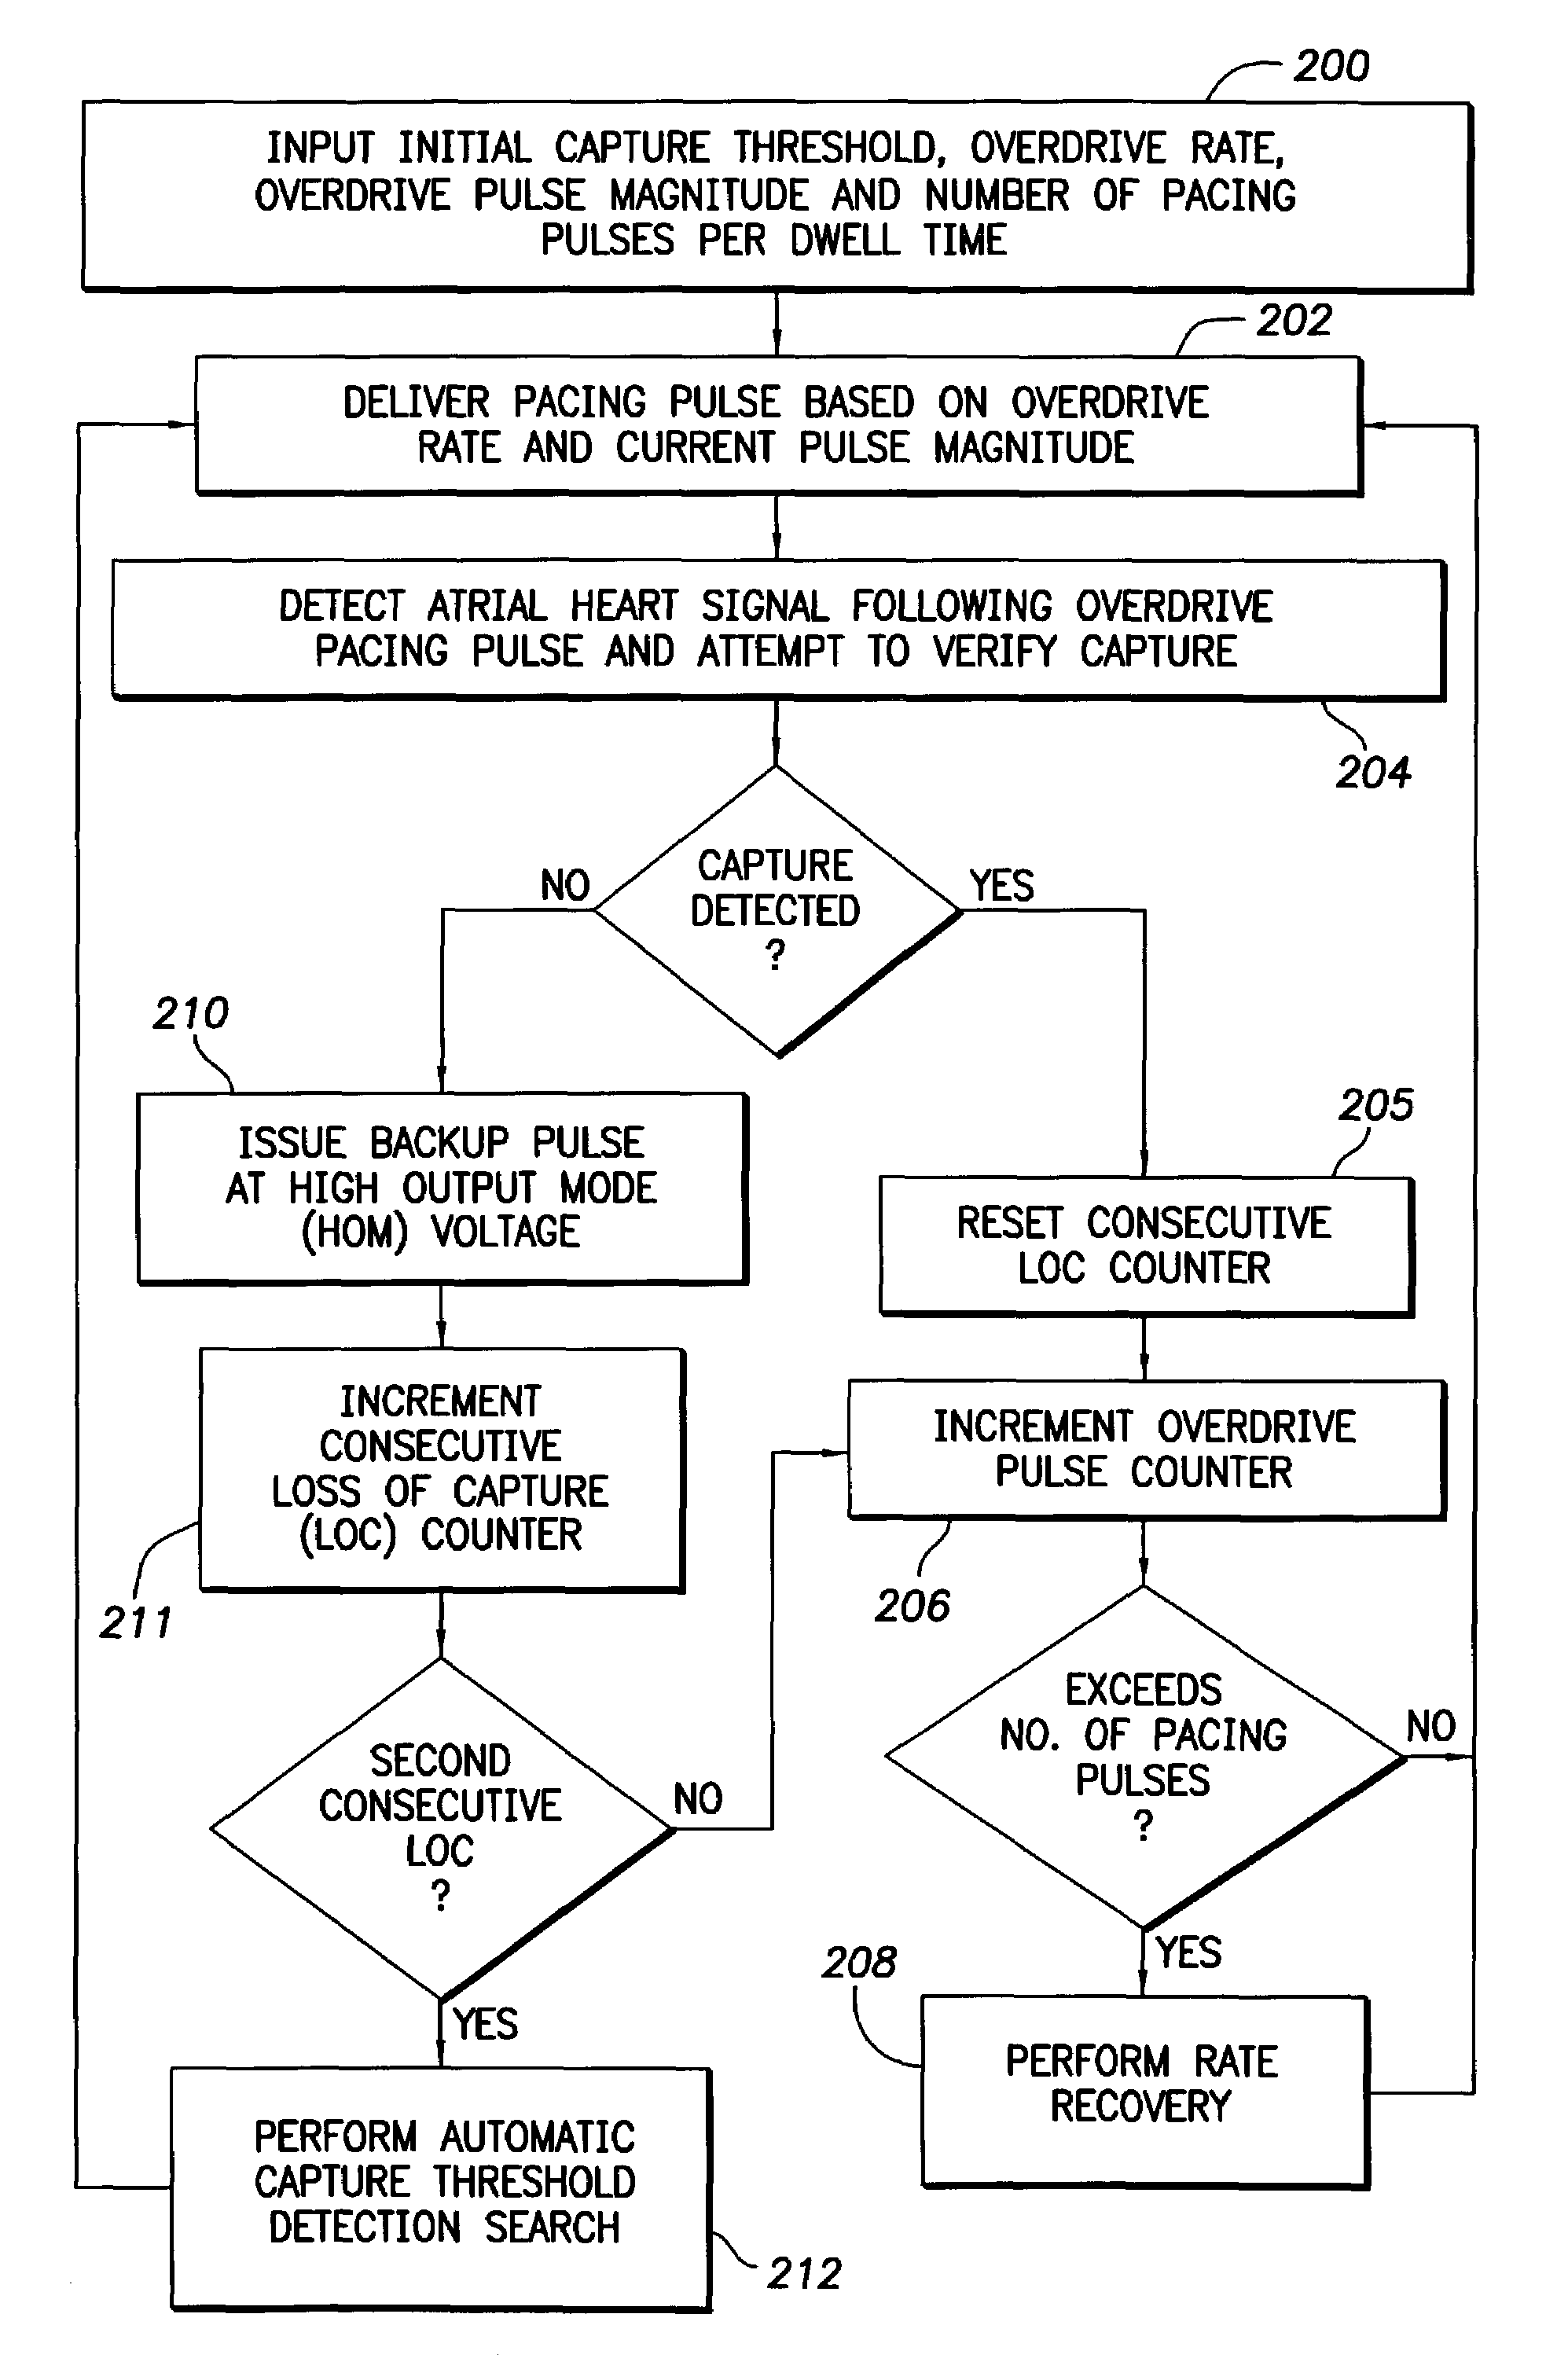 Method and apparatus for providing atrial autocapture in a dynamic atrial overdrive pacing system for use in an implantable cardiac stimulation device